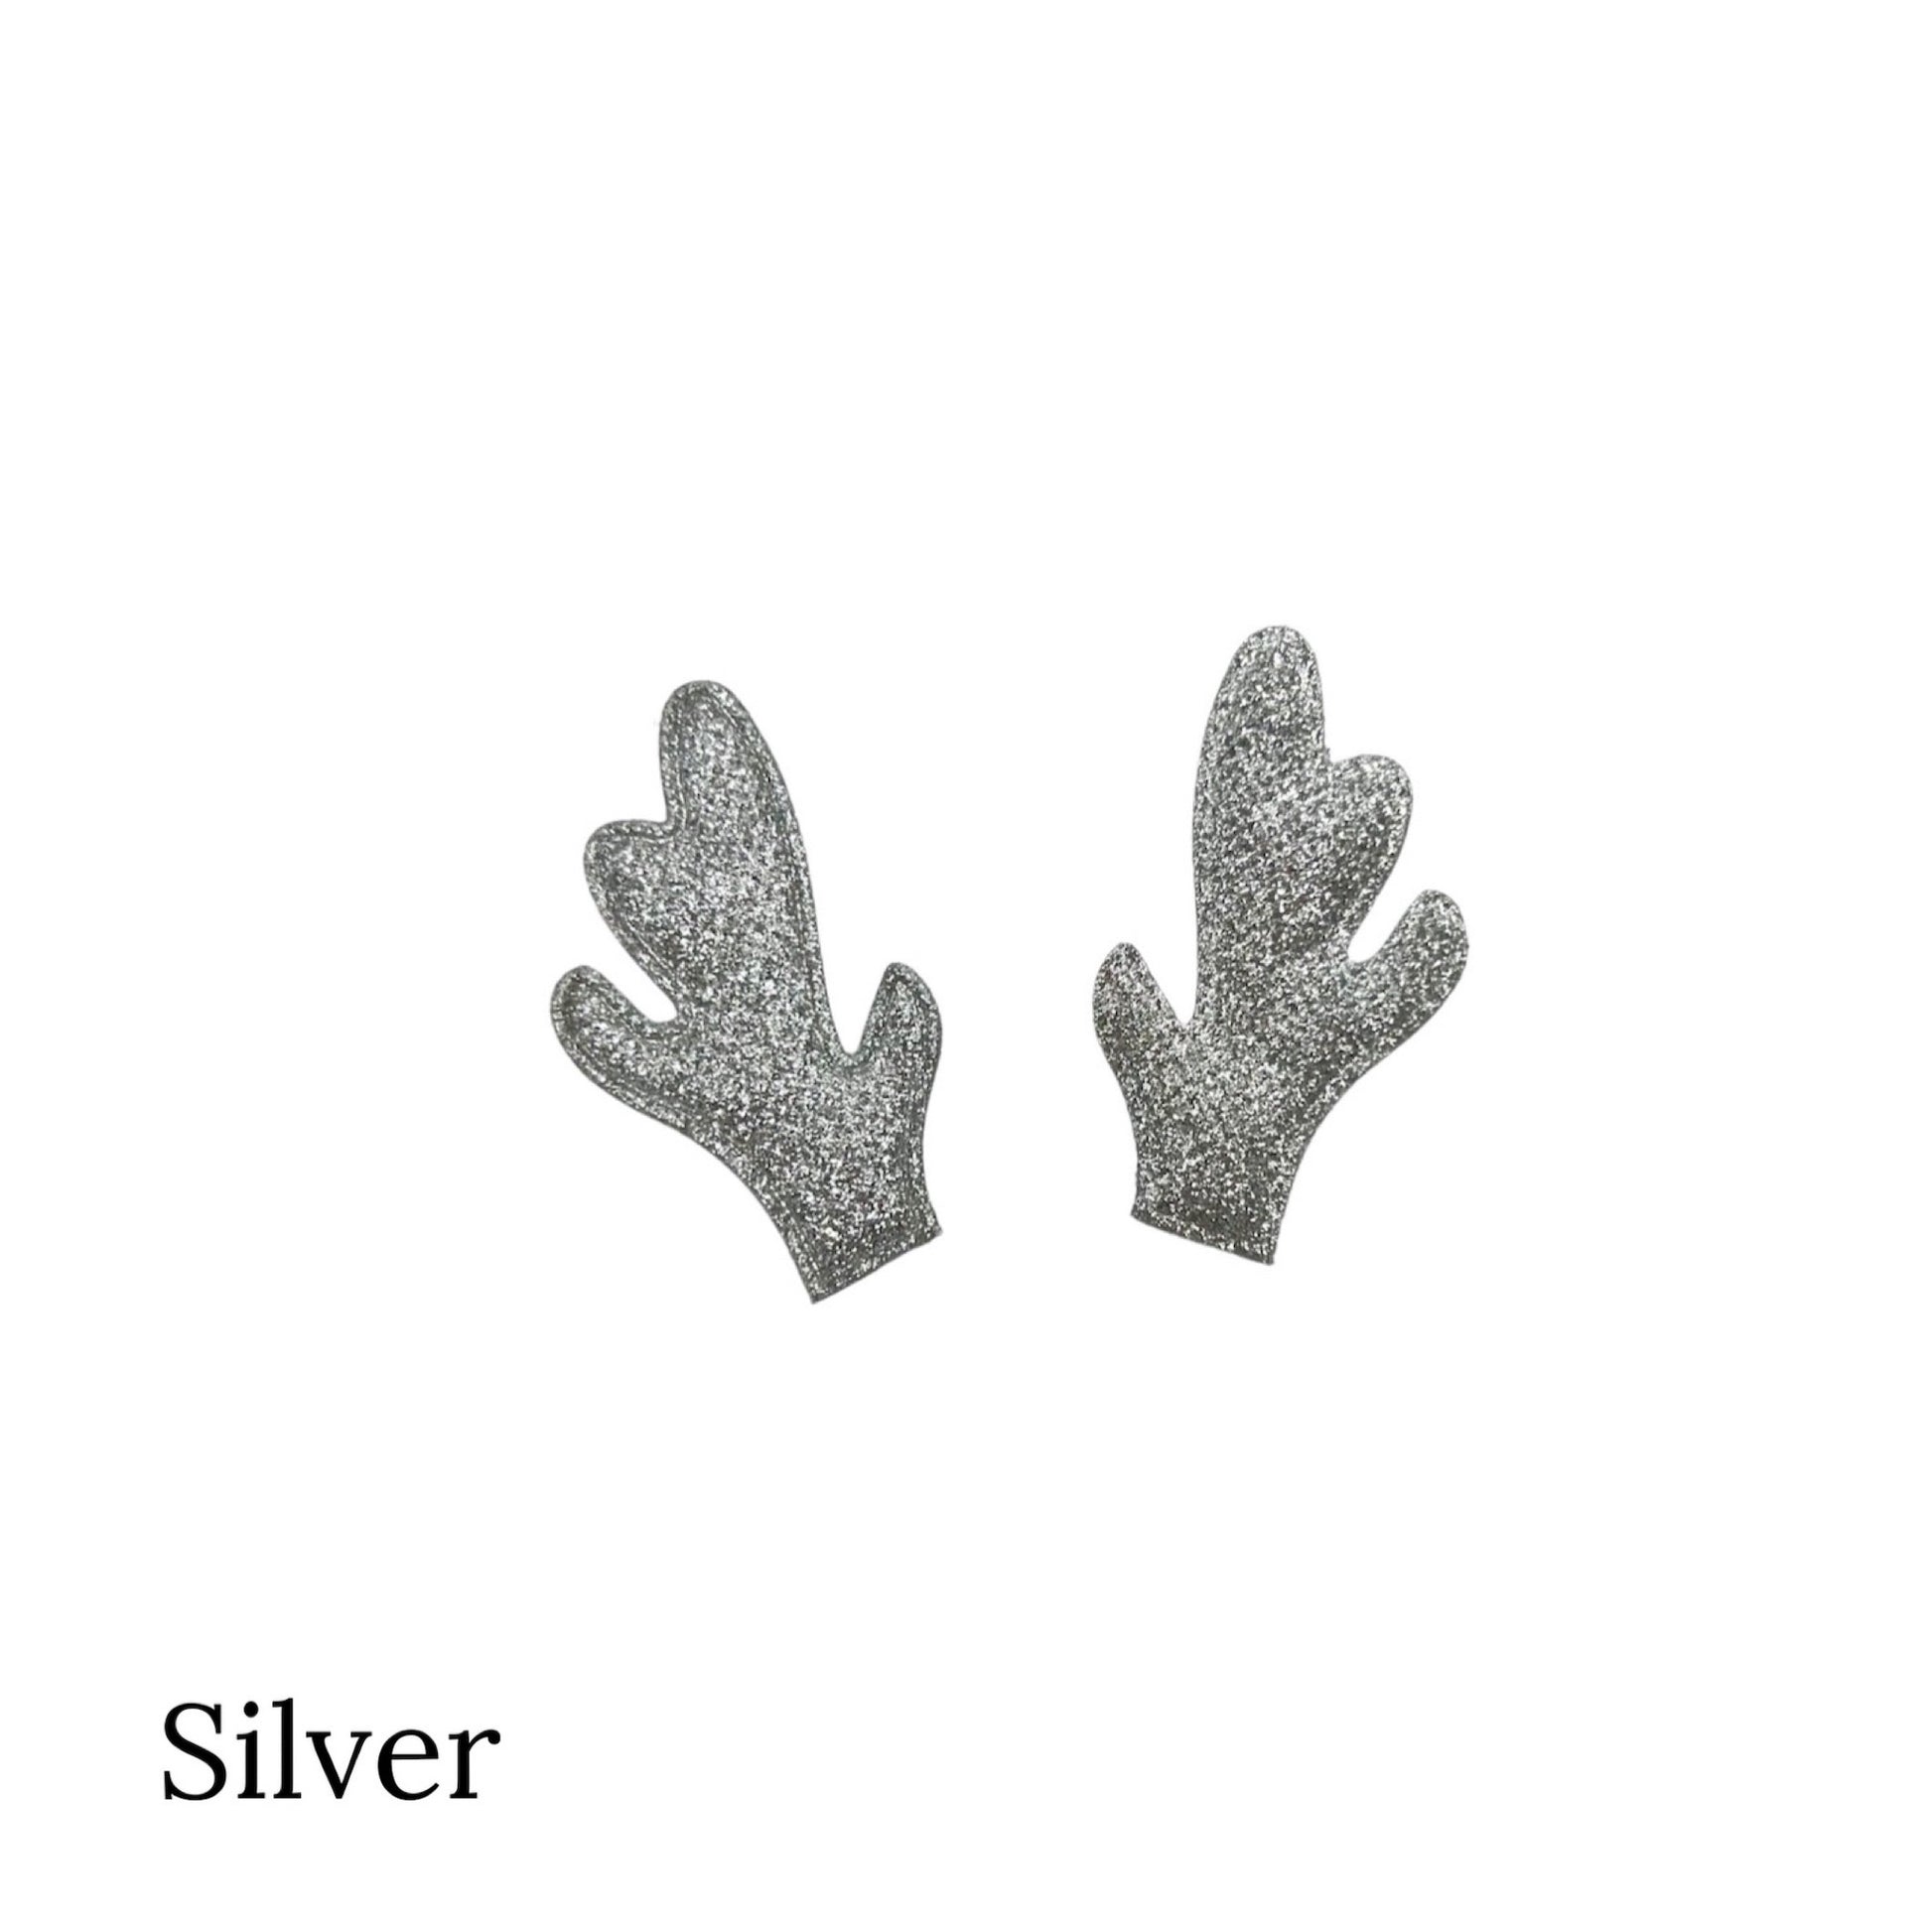 silver antlers on a white background